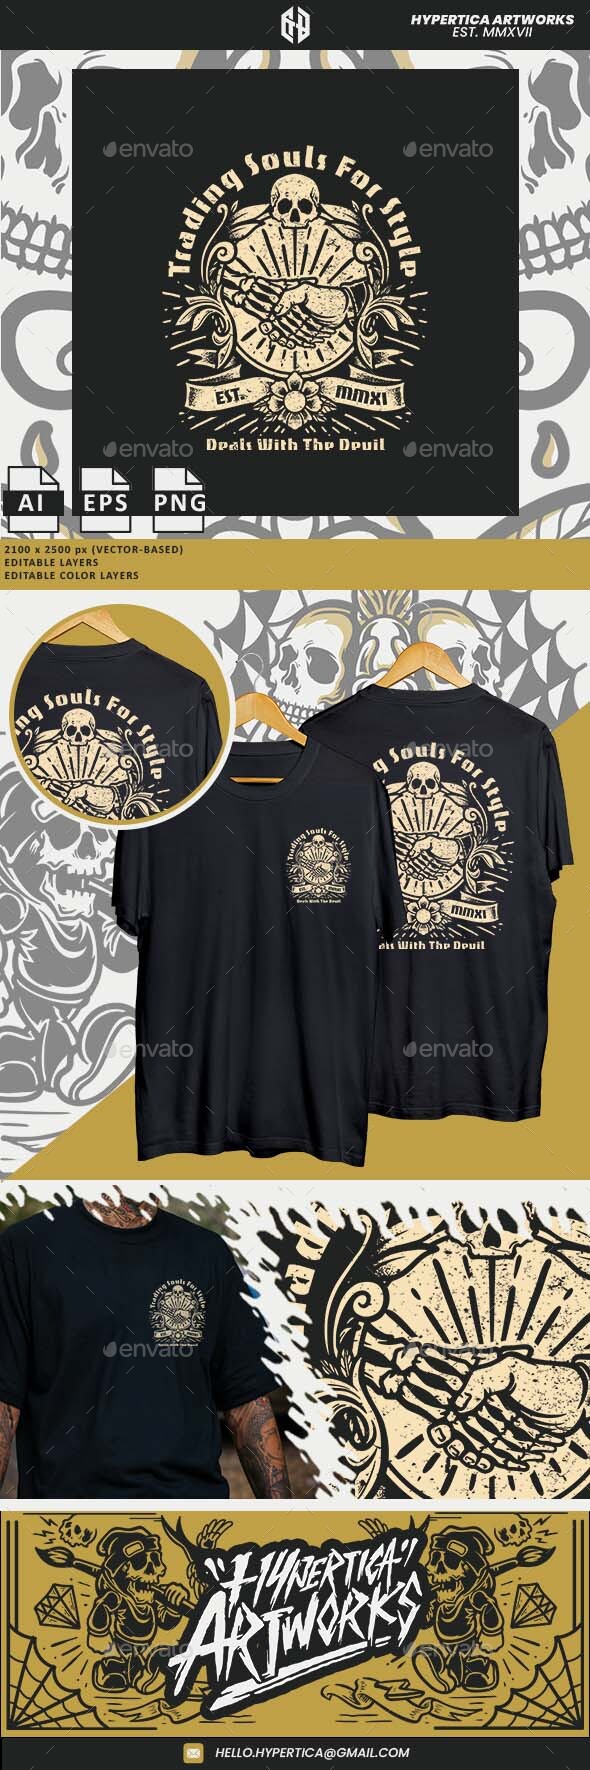 [DOWNLOAD]Illustration Of A Skull Shaking Hands With A Human Hand T-Shirt Design